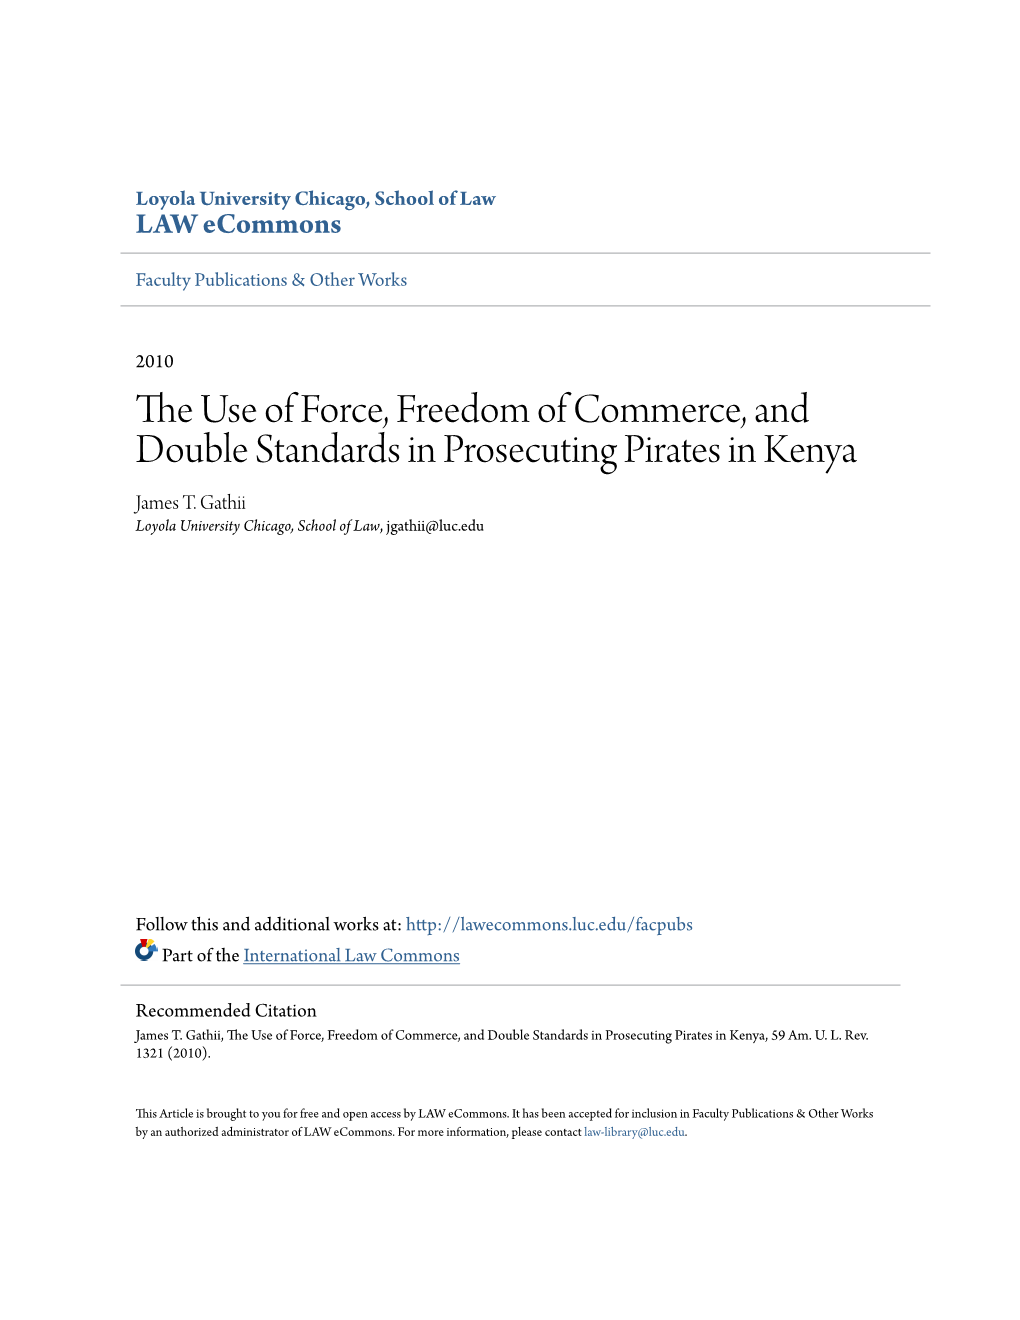 The Use of Force, Freedom of Commerce, and Double Standards in Prosecuting Pirates in Kenya